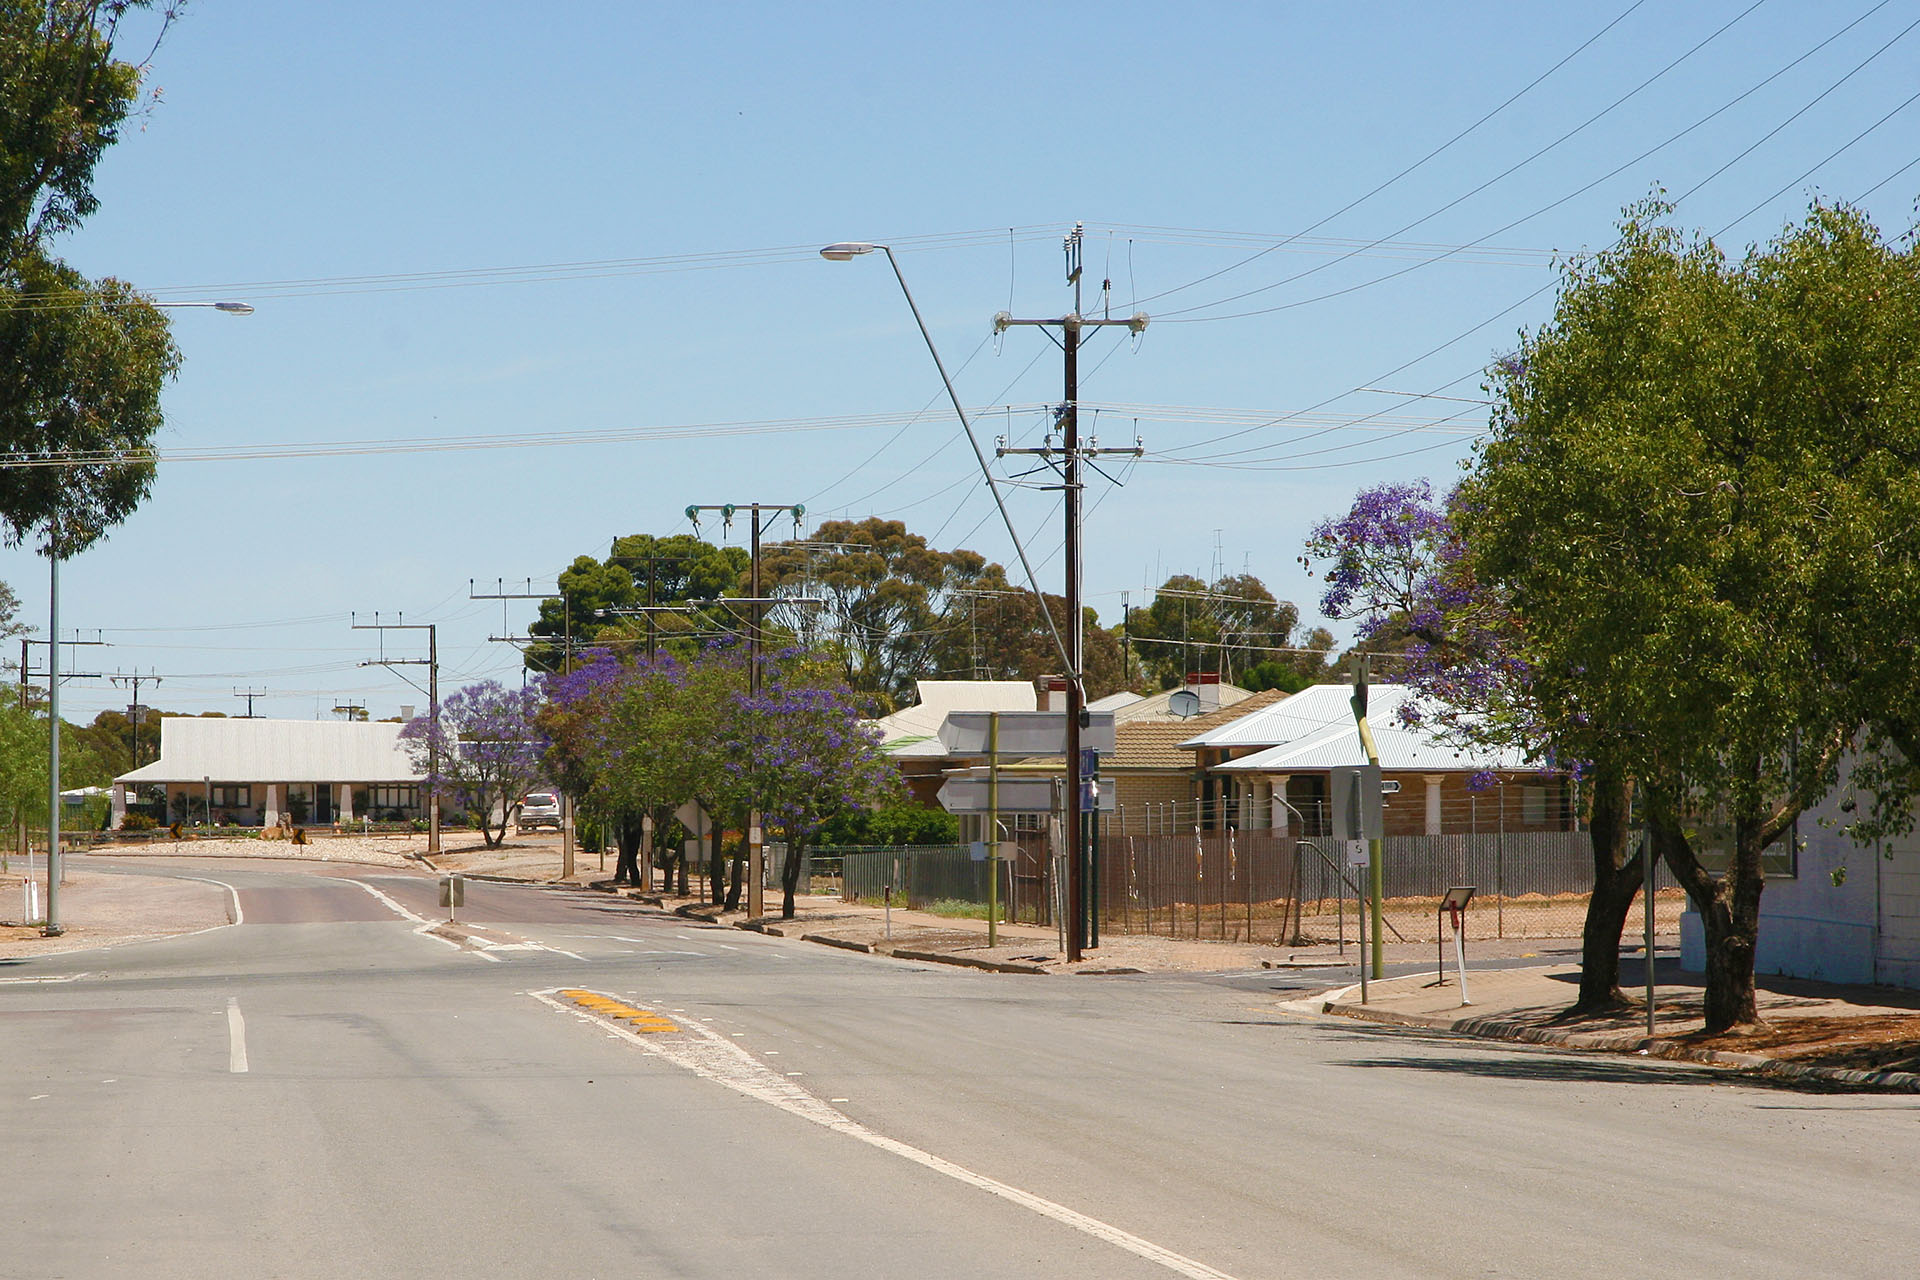 A typical outback town.